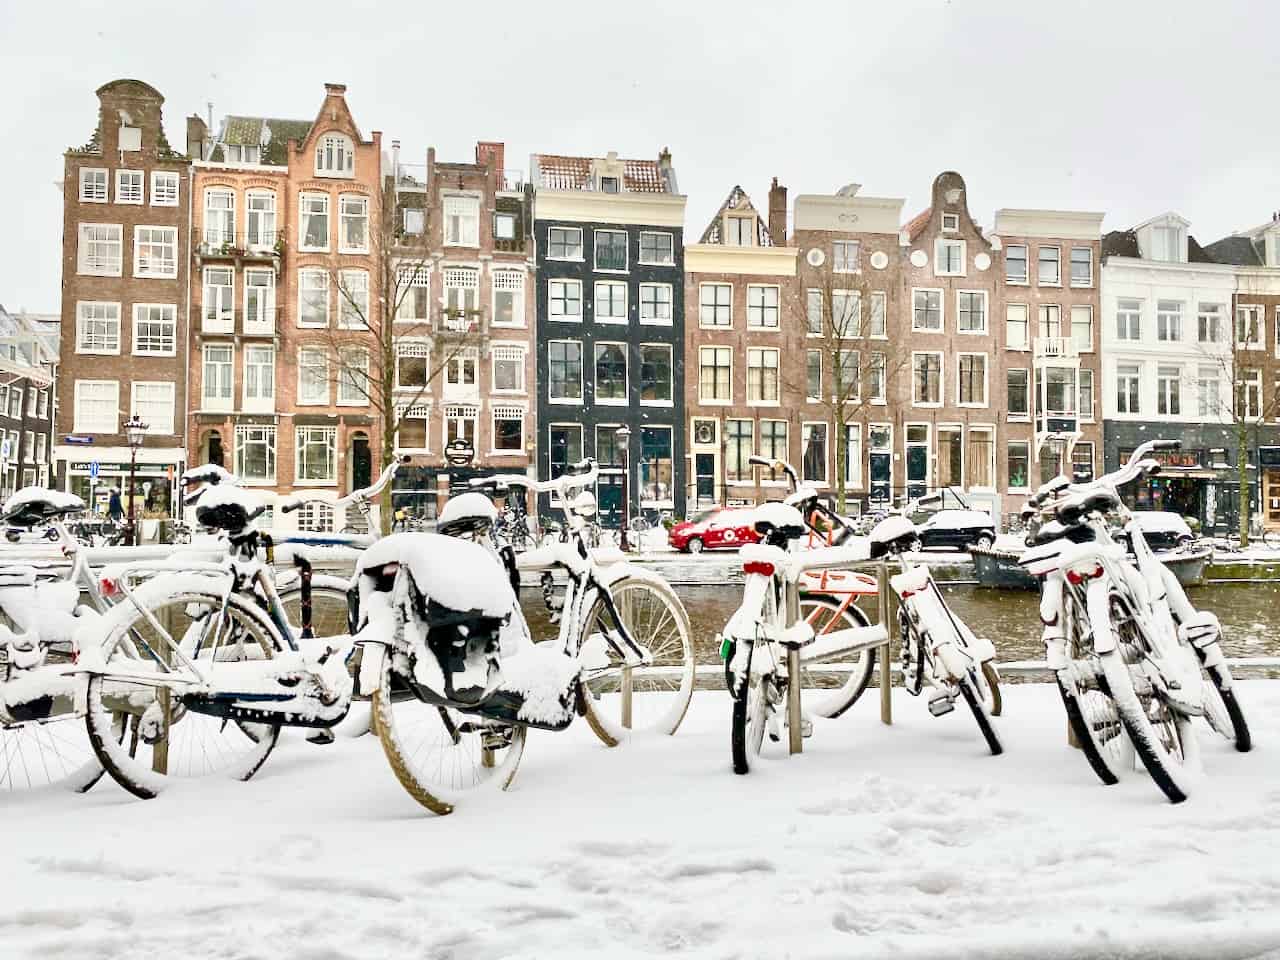 Snow and frozen canals in Amsterdam Winter 2021 Velvet Escape